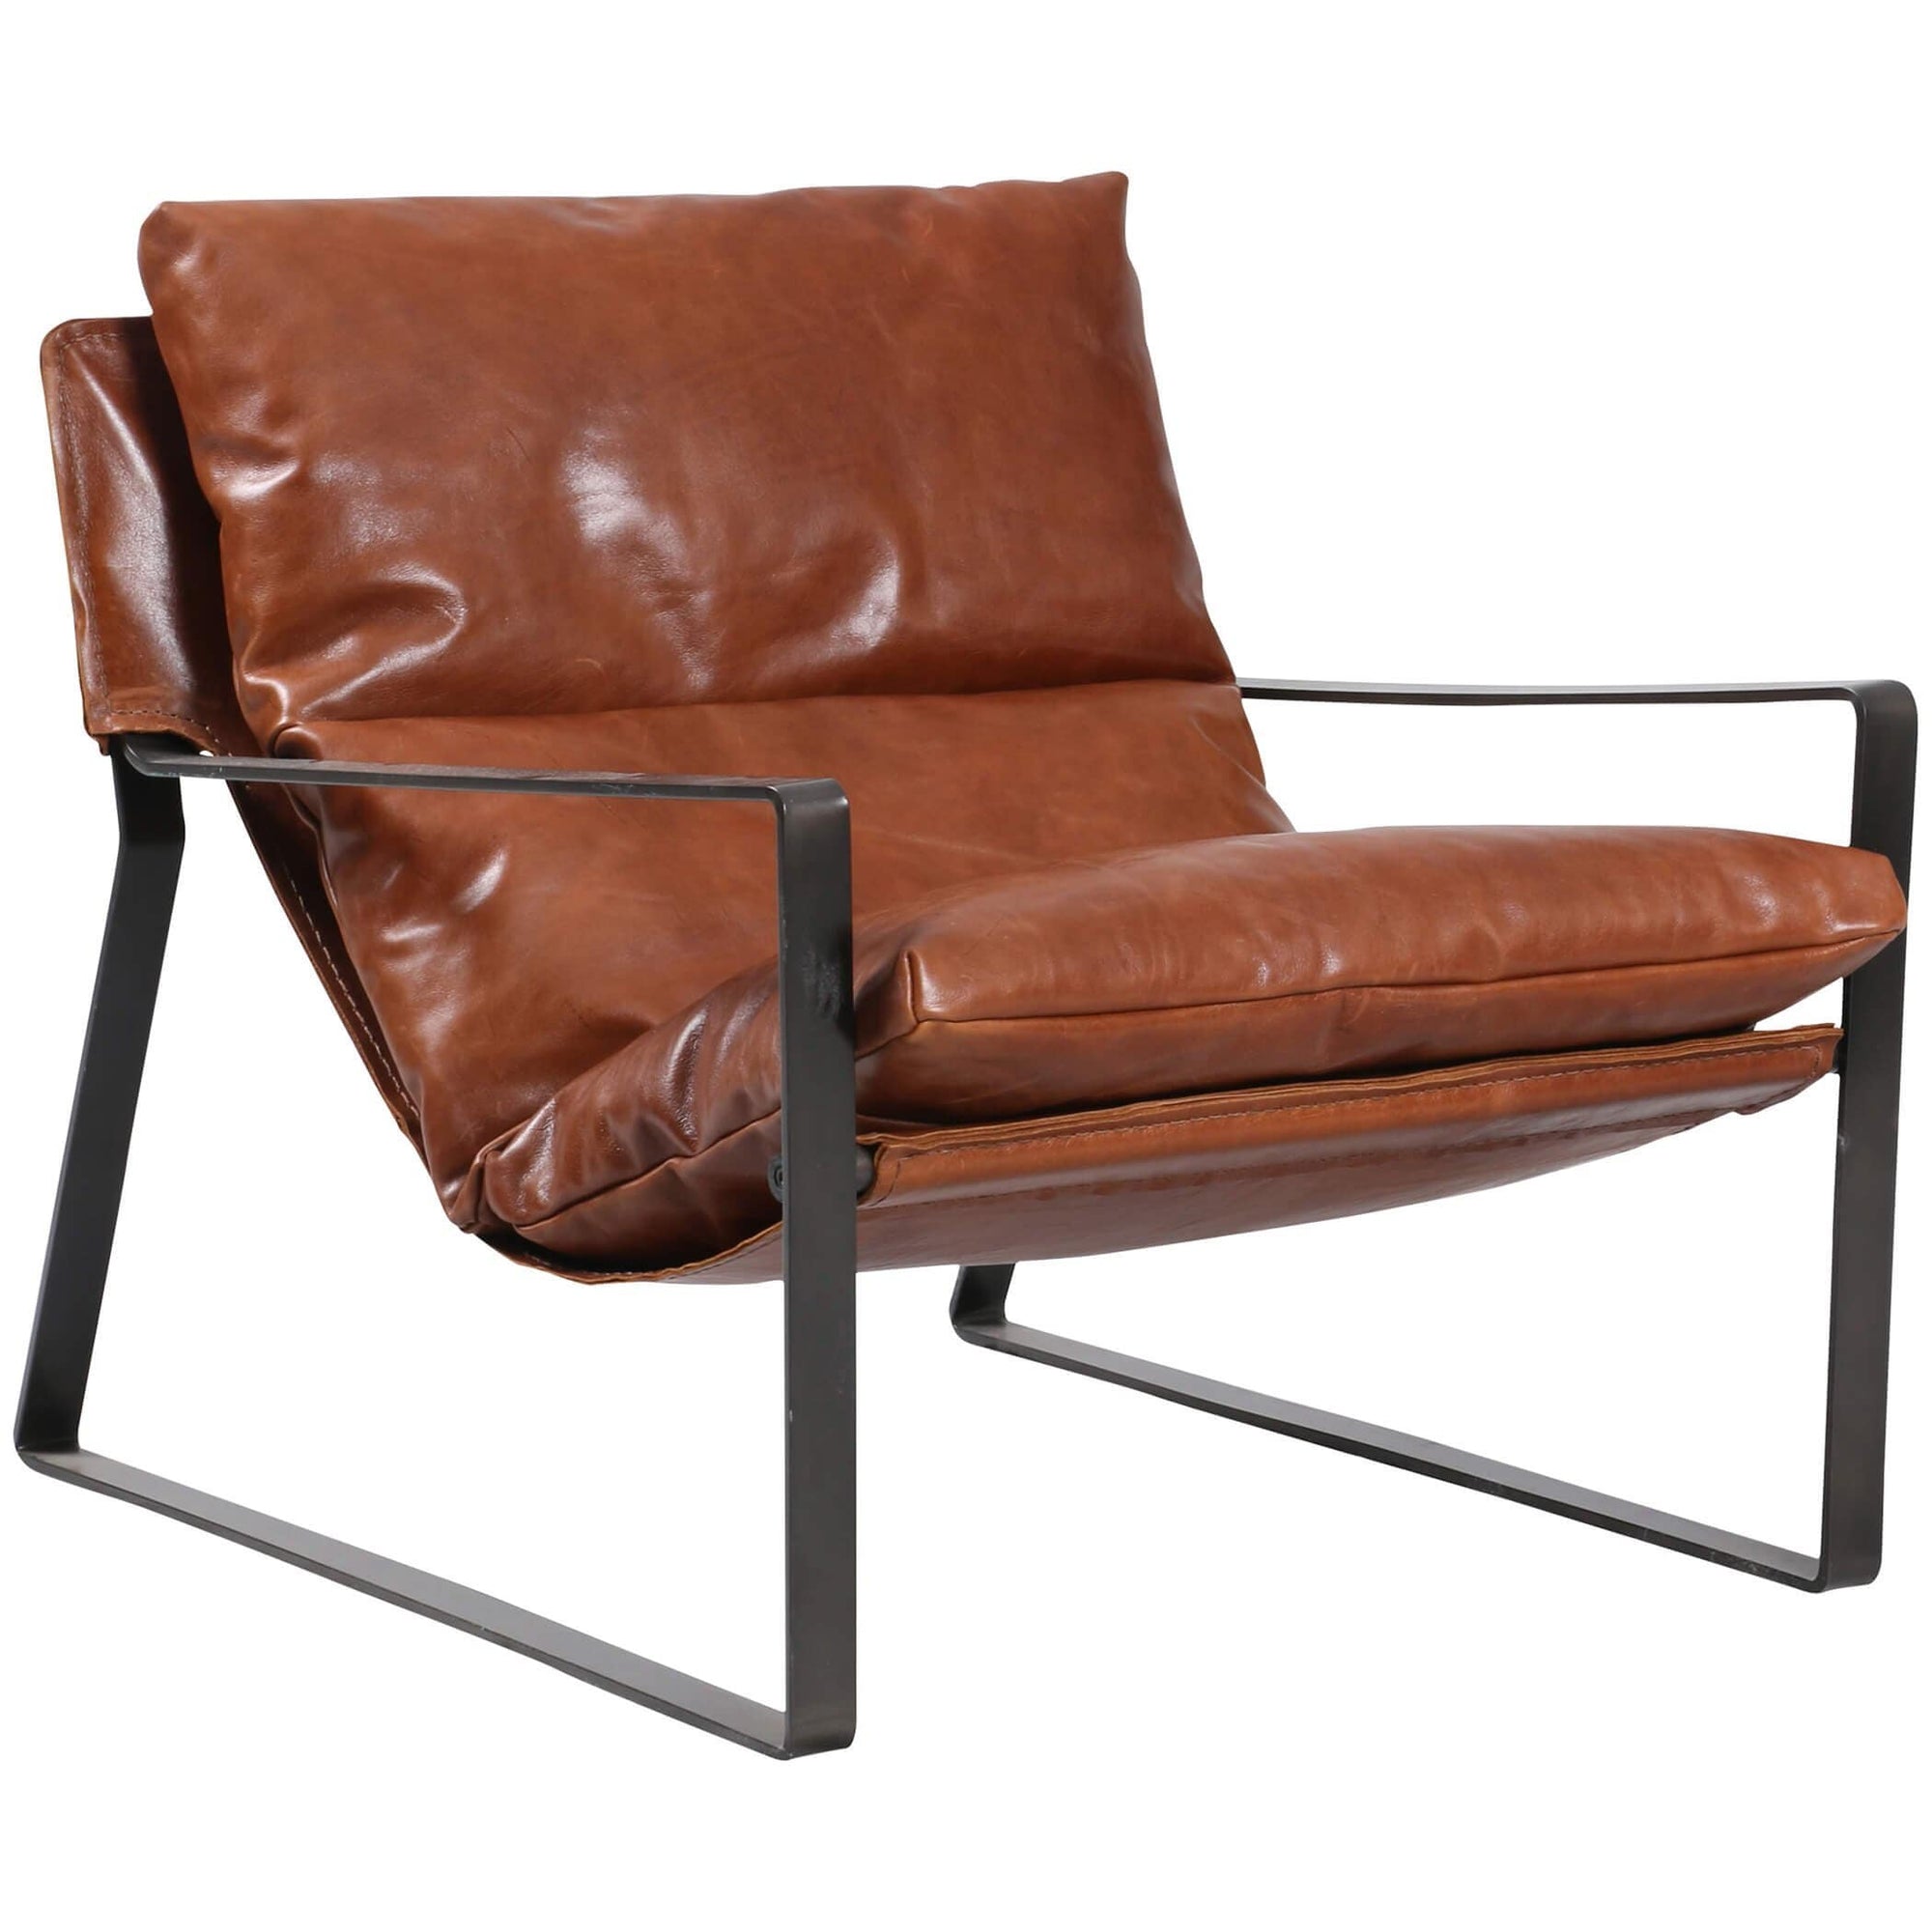 leather sling chair